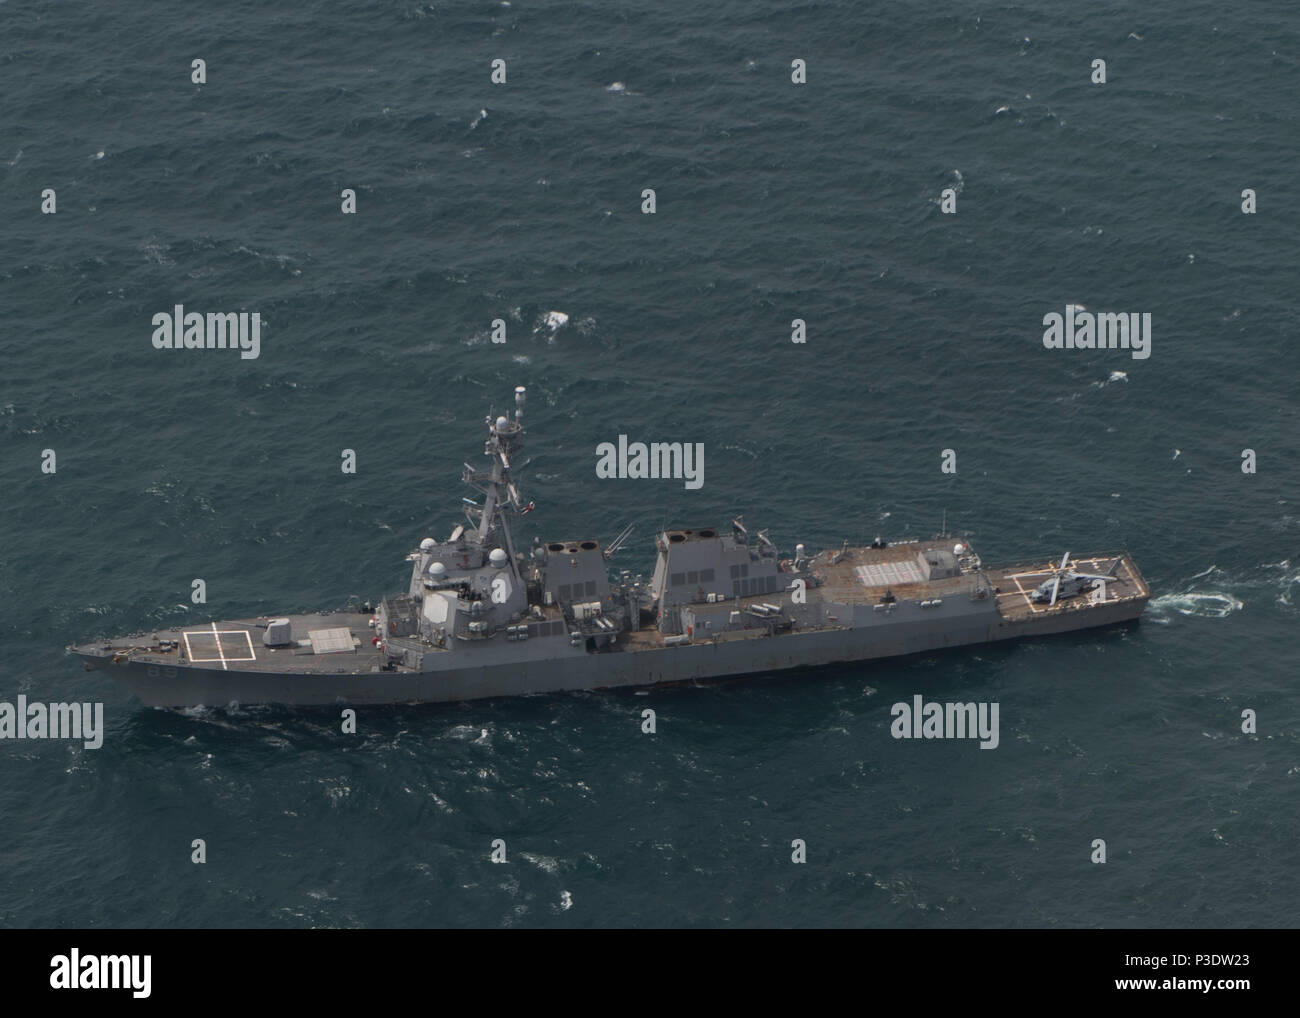 180616-N-MZ078-1087  GULF OF THAILAND (June 16, 2018) - The Arleigh Burke-class guided-missile destroyer USS Mustin (DDG 89) steams in the Gulf of Thailand in support of Cooperation Afloat Readiness and Training (CARAT) Thailand 2018. The CARAT exercise series, in its 24th iteration, highlights the skill and will of regional partners to cooperatively work together towards the common goal of ensuring a secure and stable maritime environment. (U.S. Navy photo by Mass Communication Specialist 3rd Class Lucas T. Hans) Stock Photo